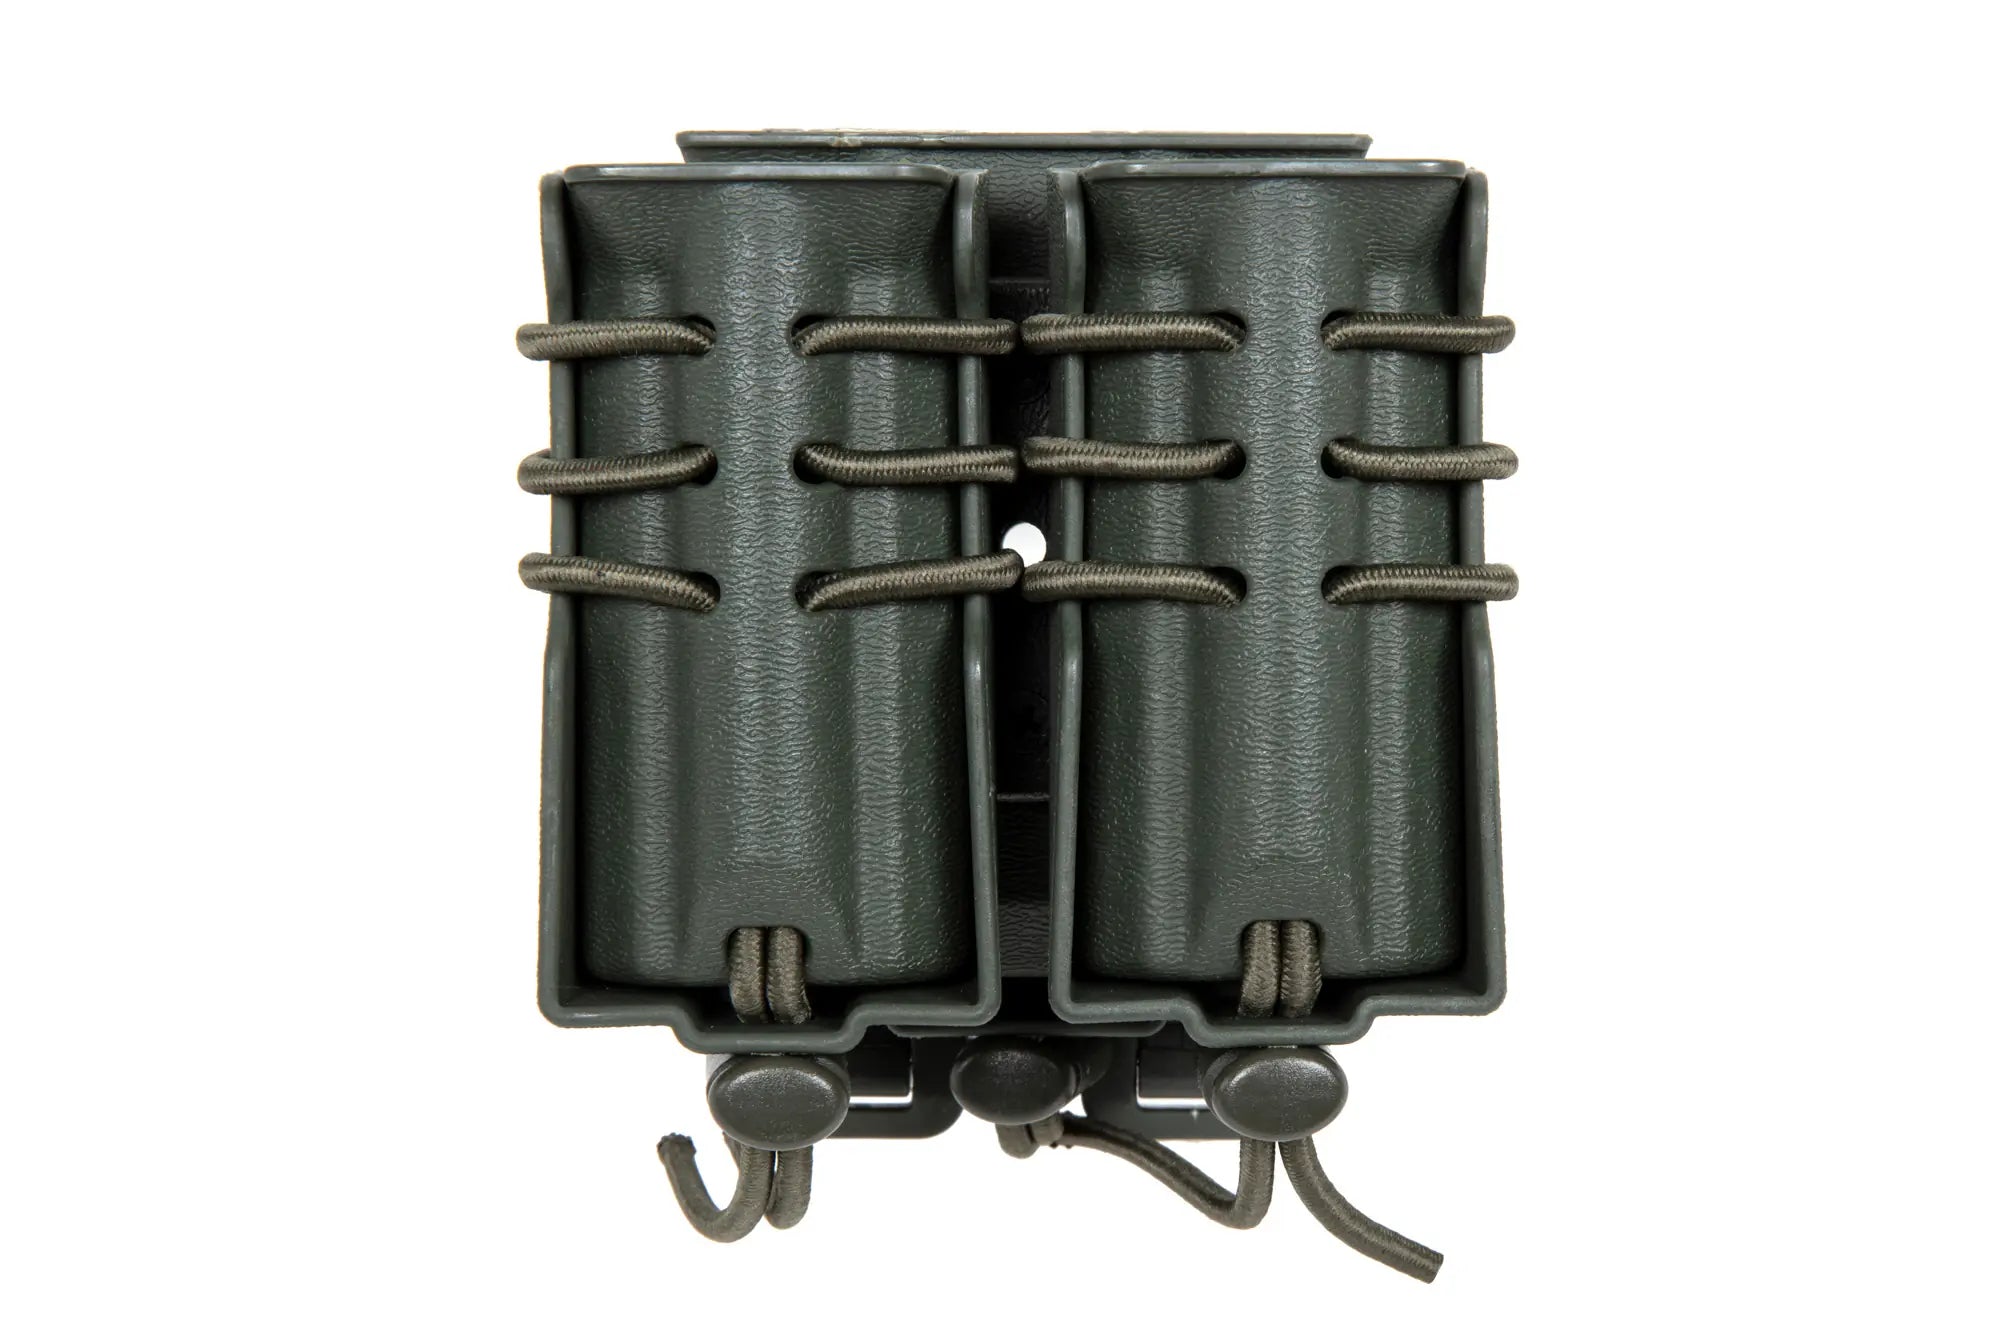 Carrier for 2 9mm magazines and an M4/M16 magazine Wosport Urban Assault Quick Pull Olive-1